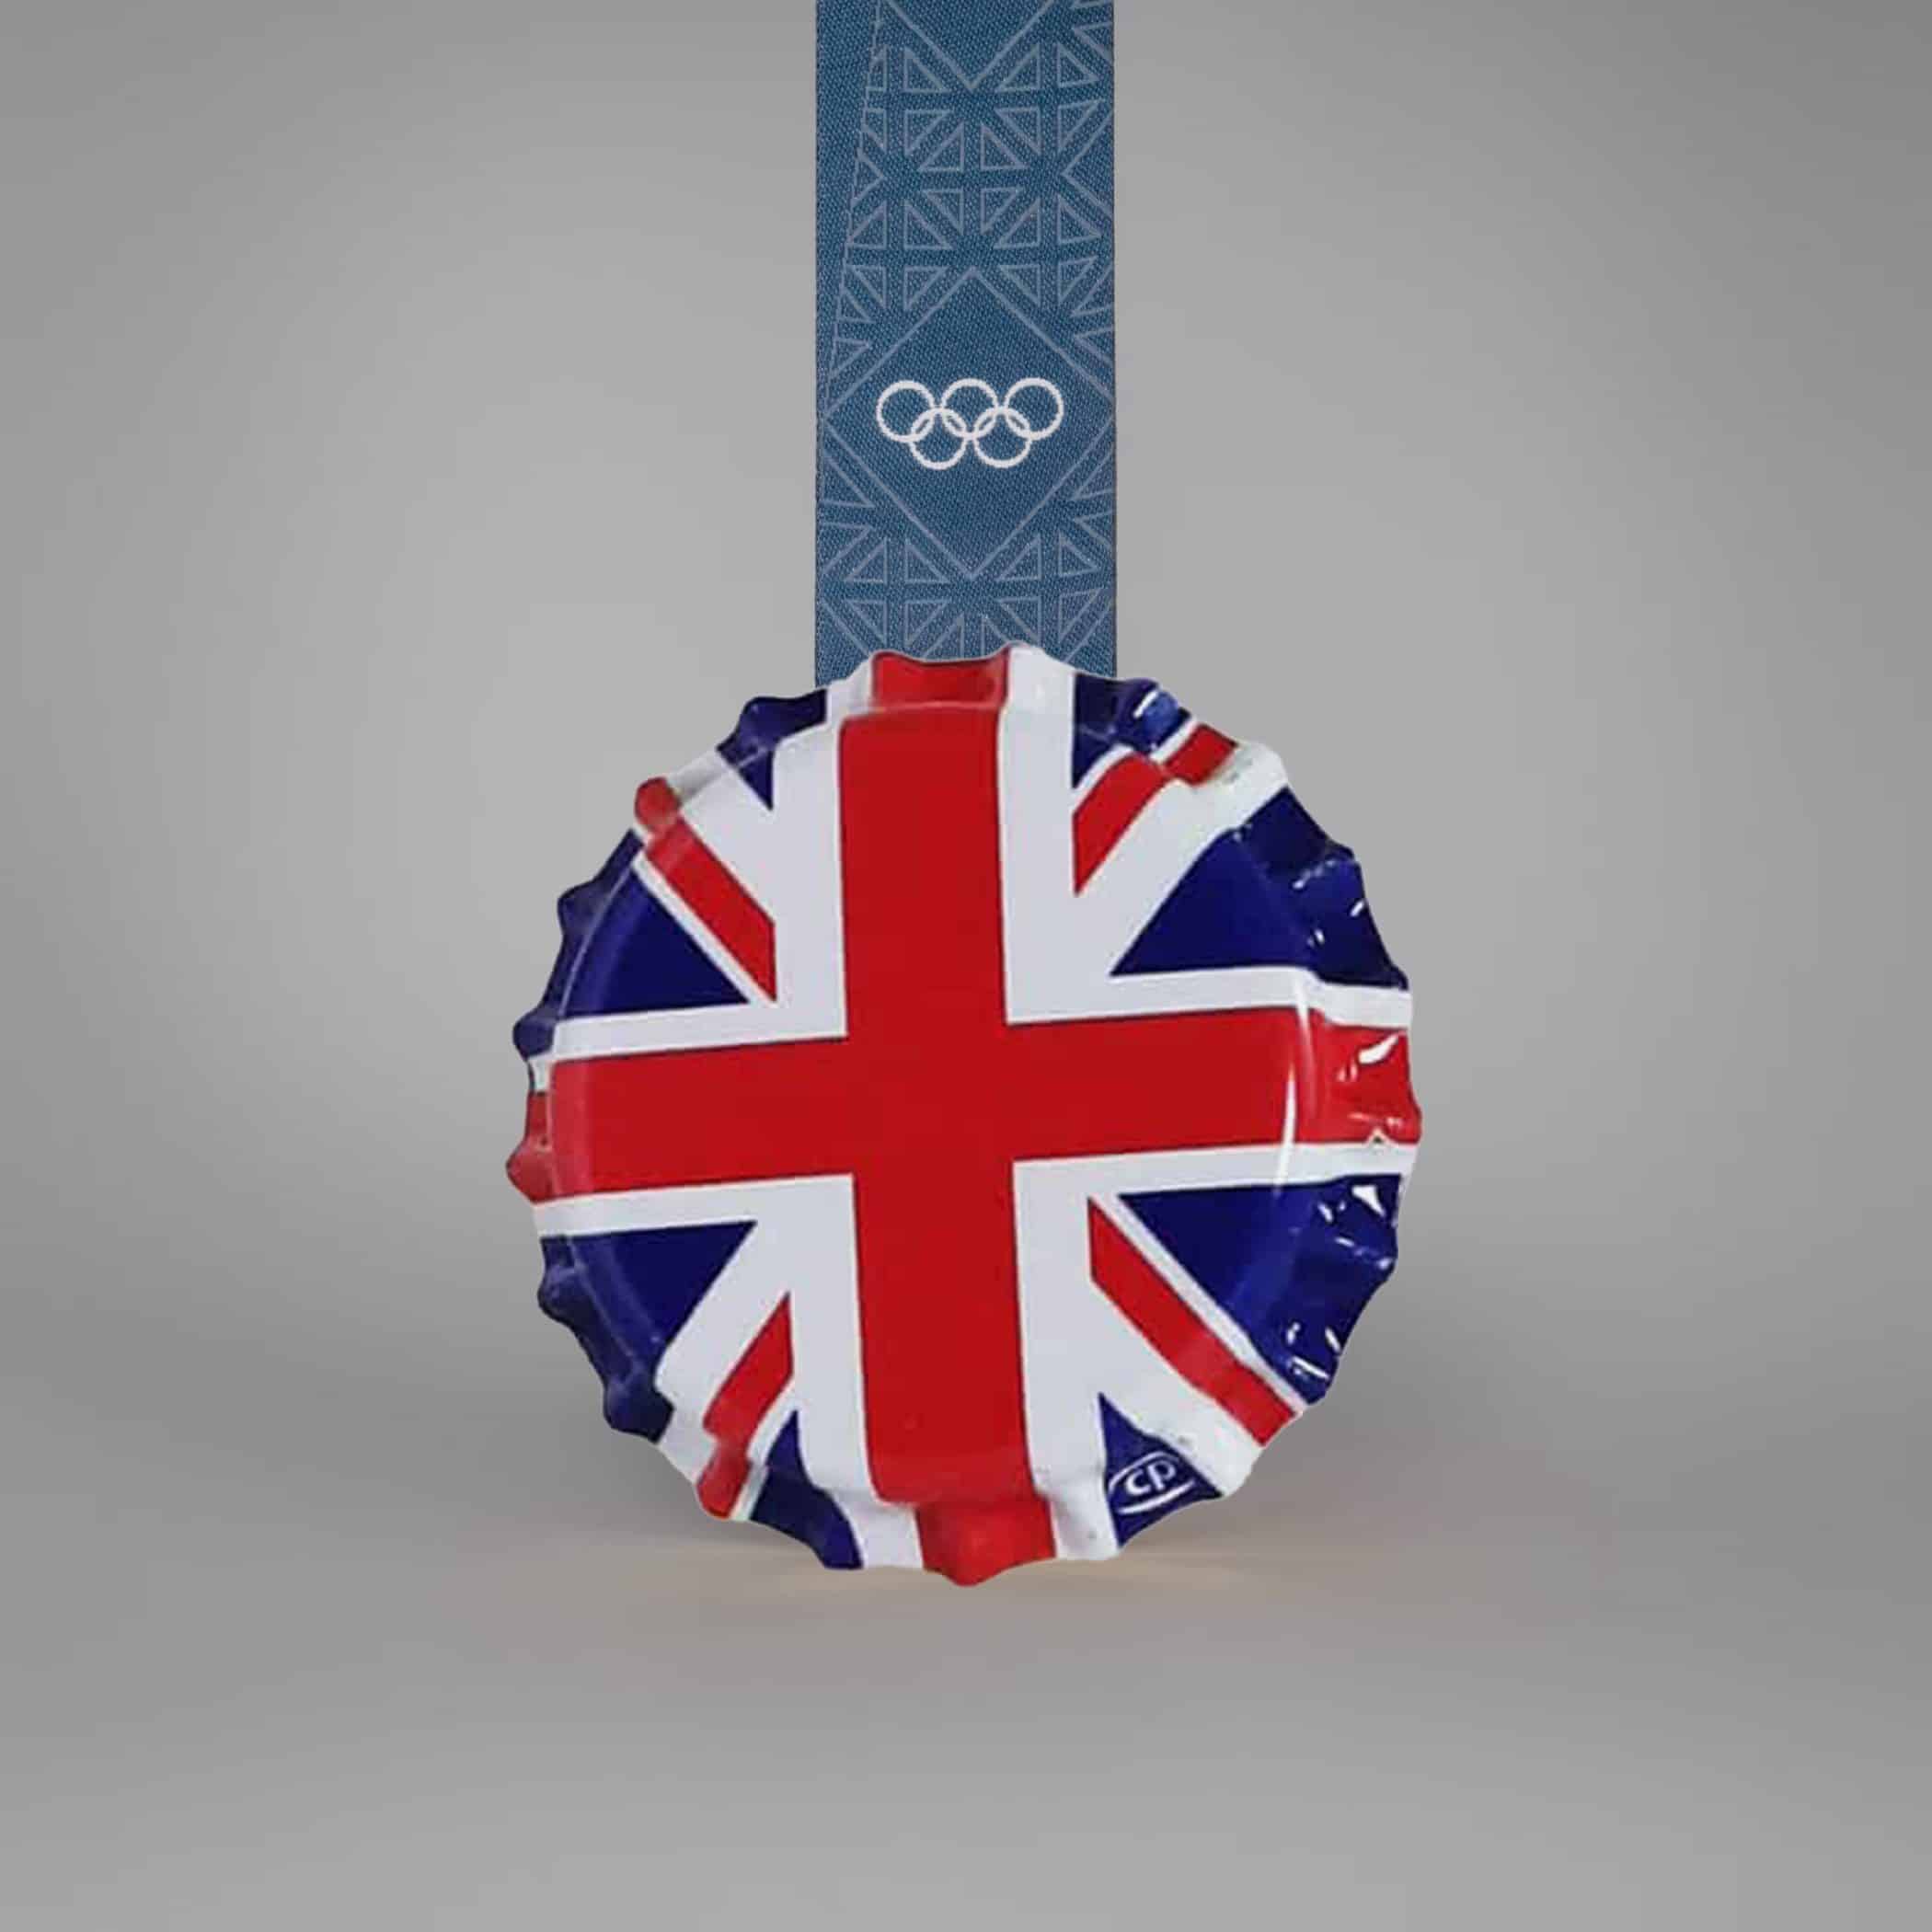 union flag beer crown on an Olympic medal necklace.